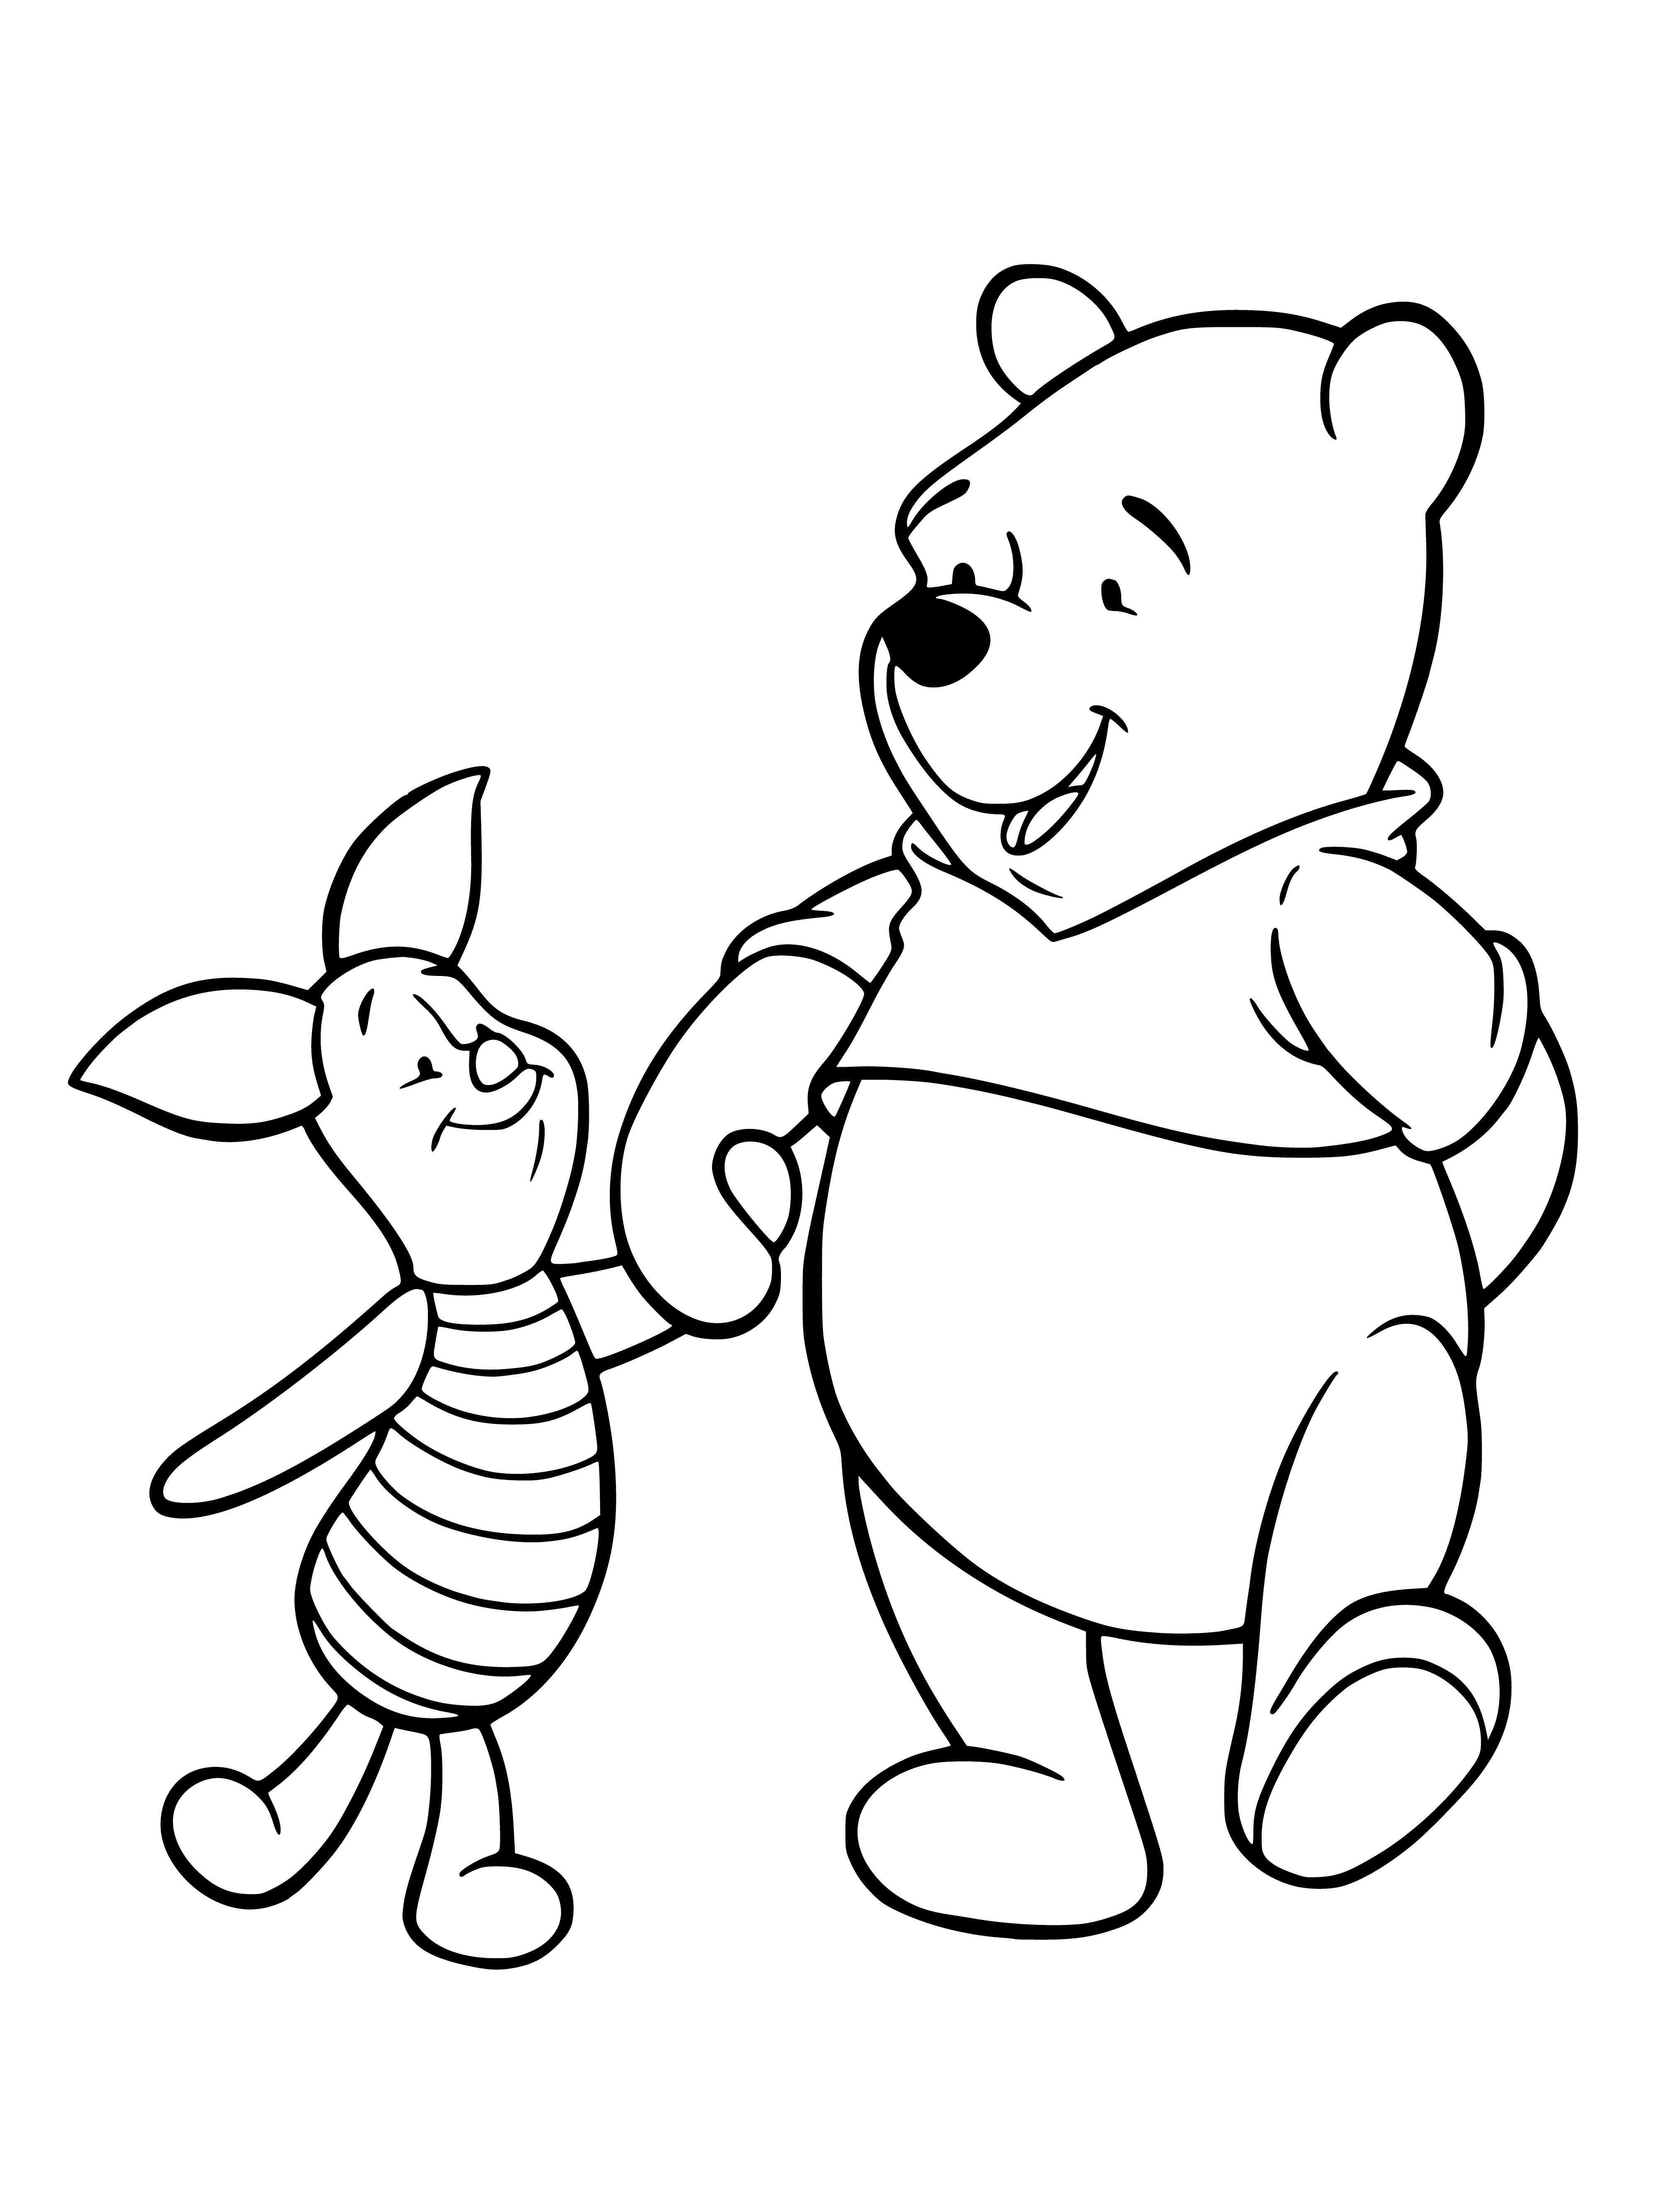 coloring page: Two friends, Winnie the Pooh and Piggy, embrace in a forest.